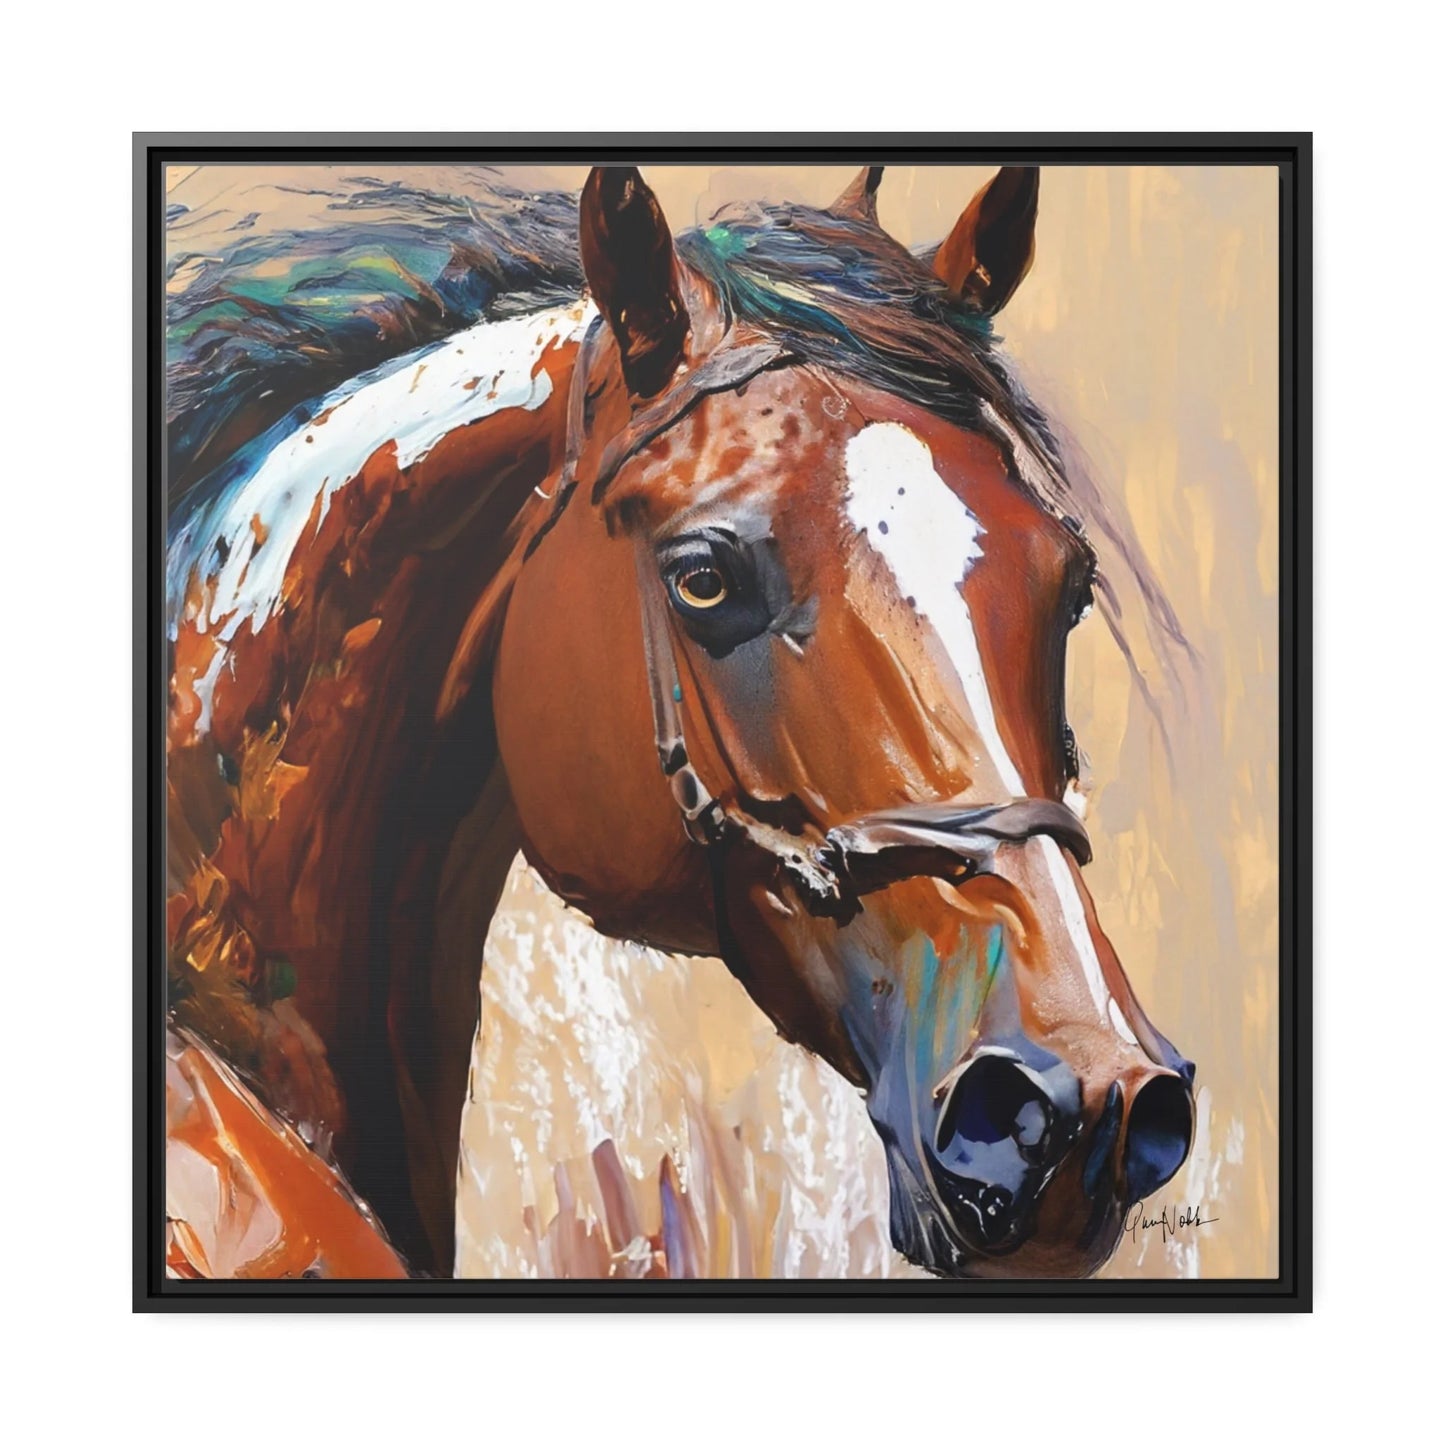 Equine Elegance: Brown Horse Portrait Canvas Wall Art by Queennoble